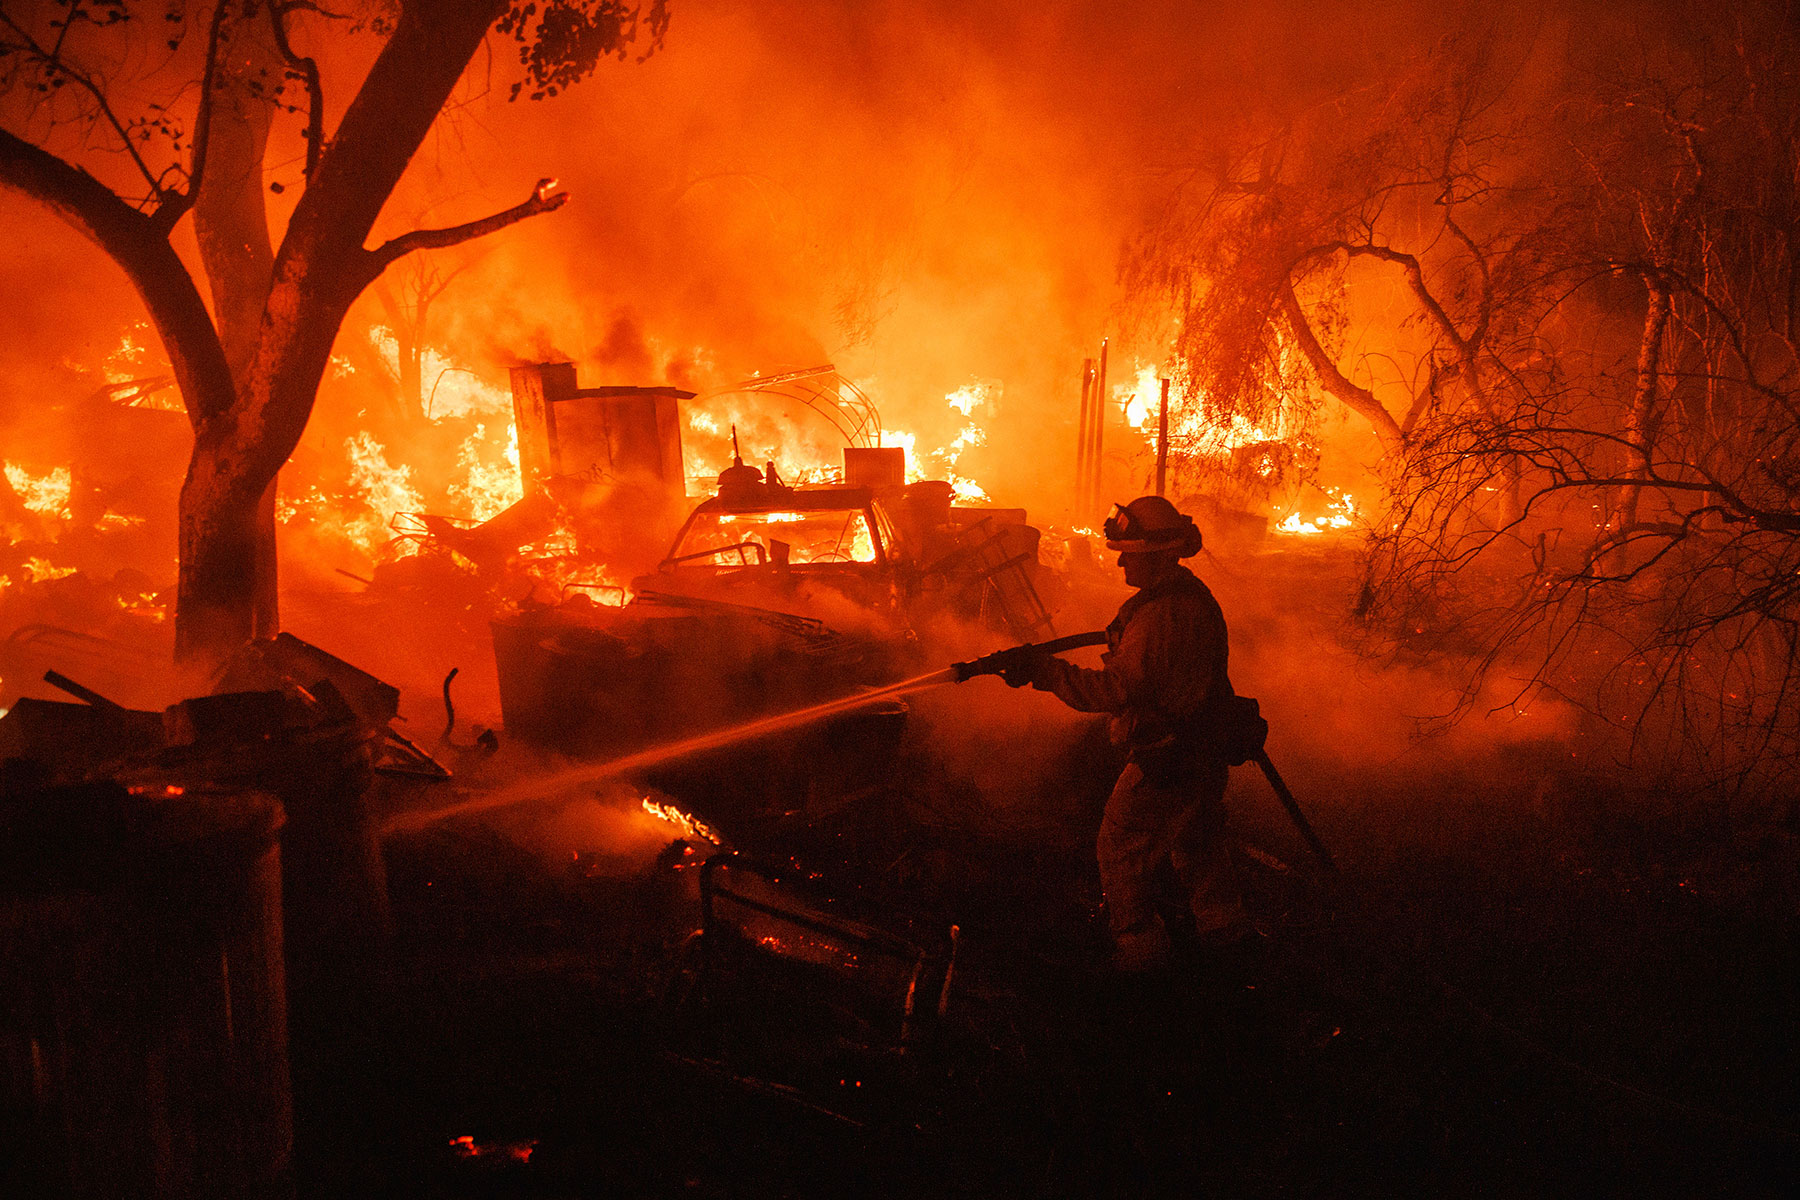 A firefighter points a hose at a burning structure, while orange flames blaze in the background.